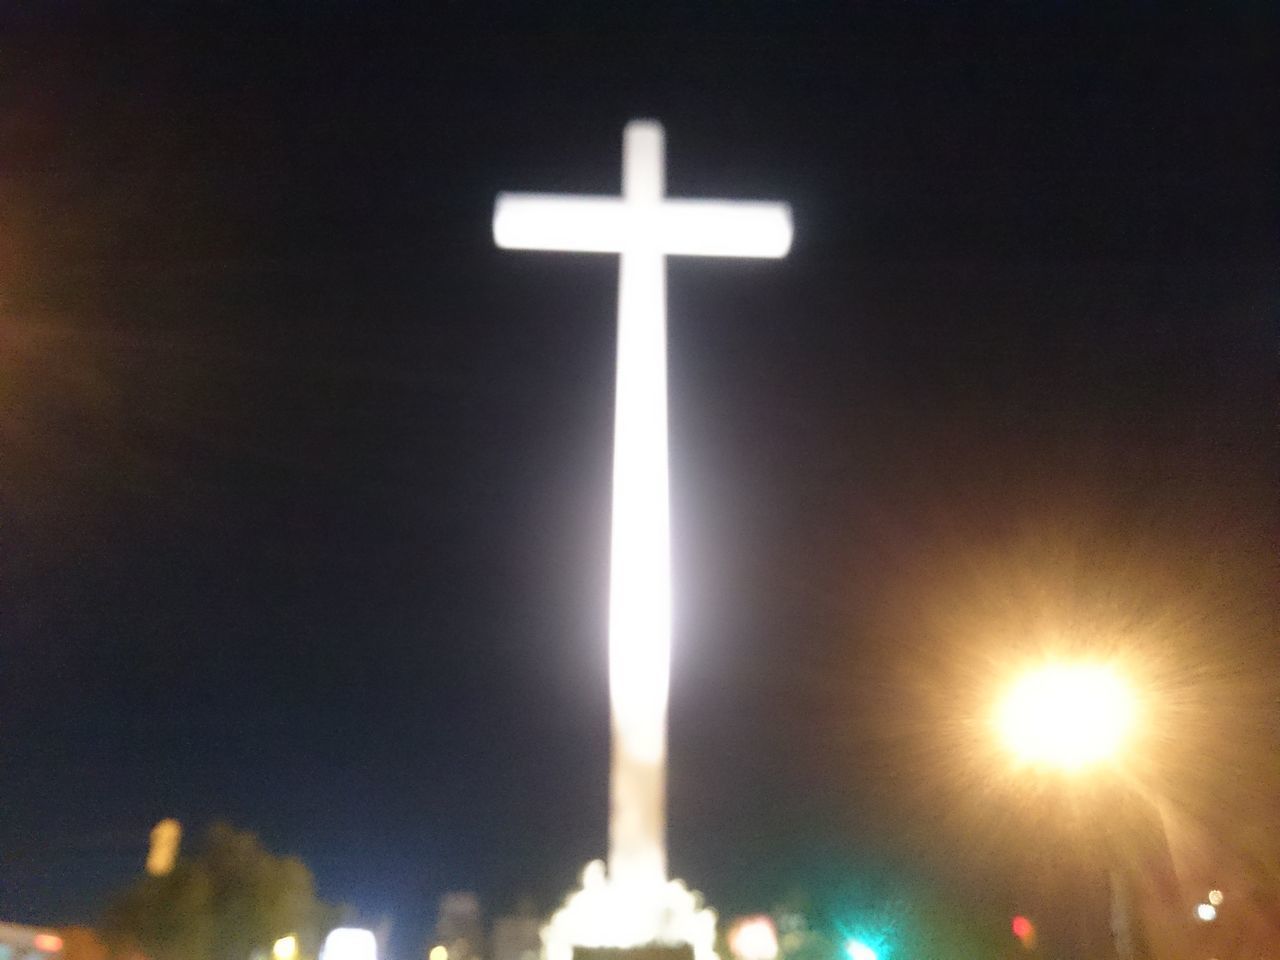 VIEW OF CROSS AT NIGHT